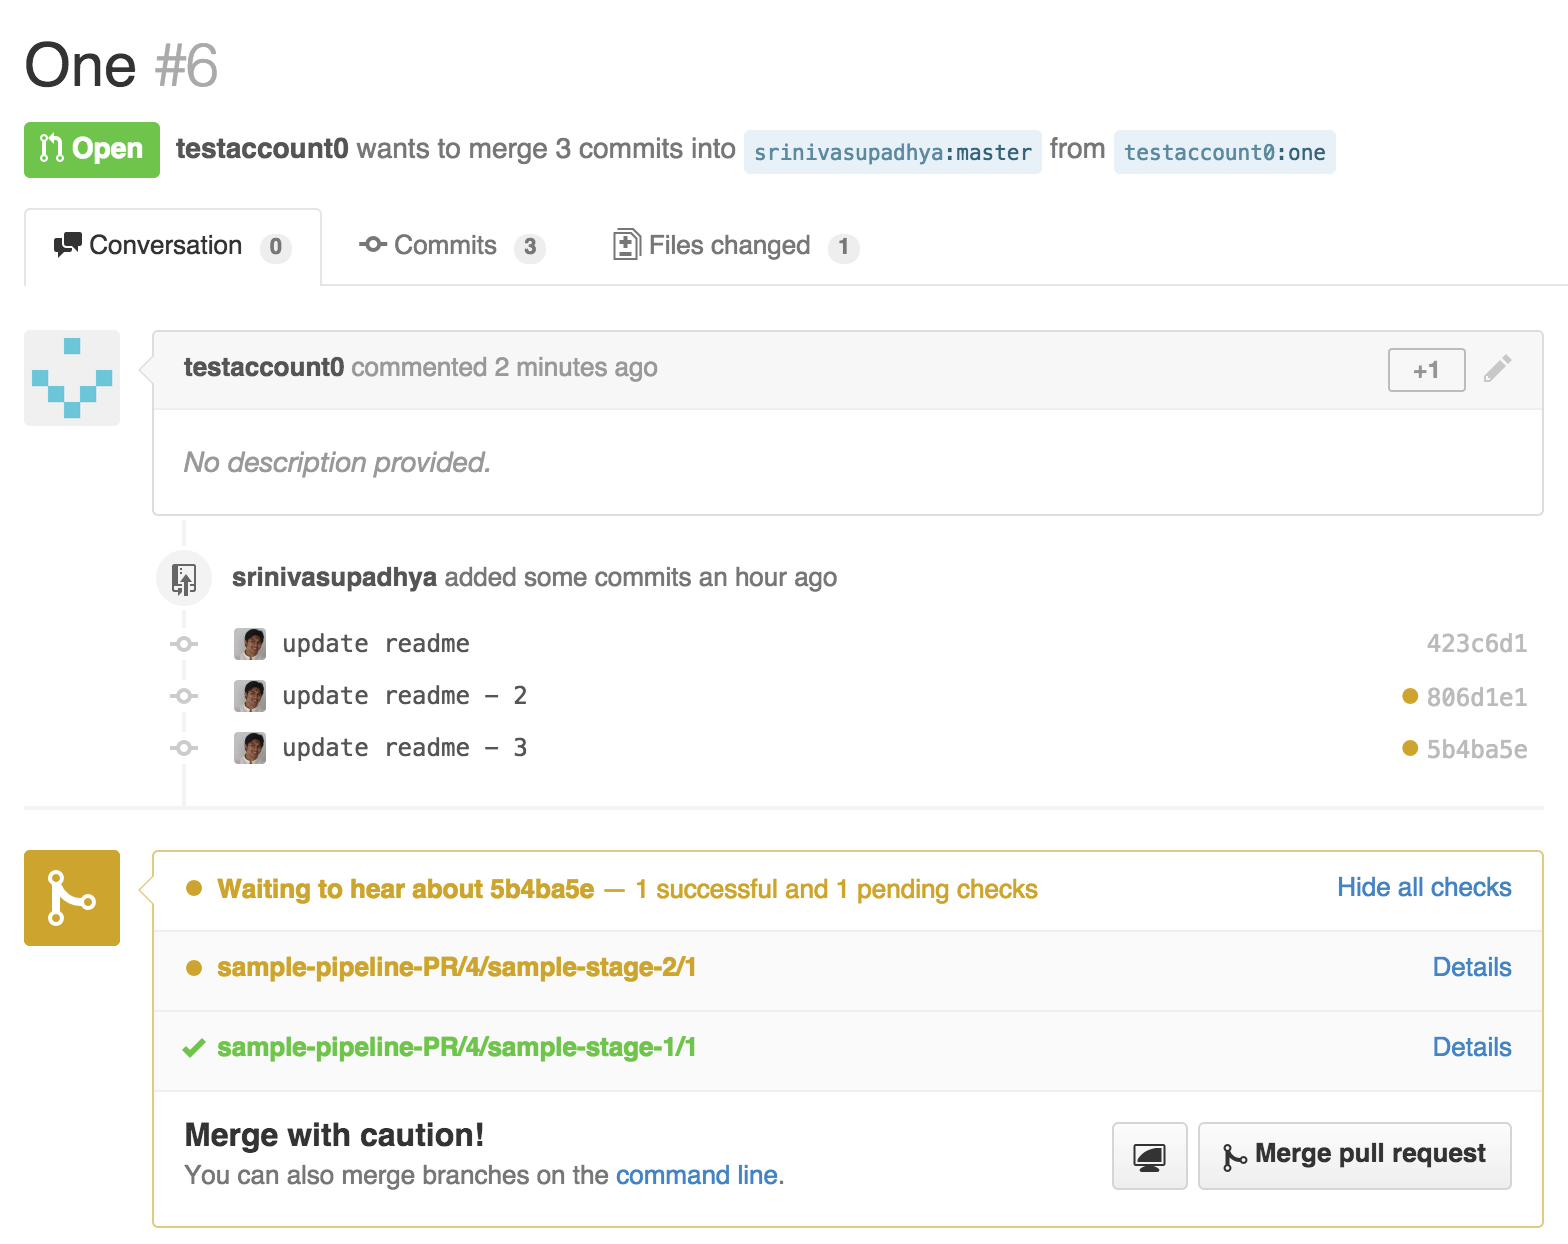 GitHub PR page gets updated